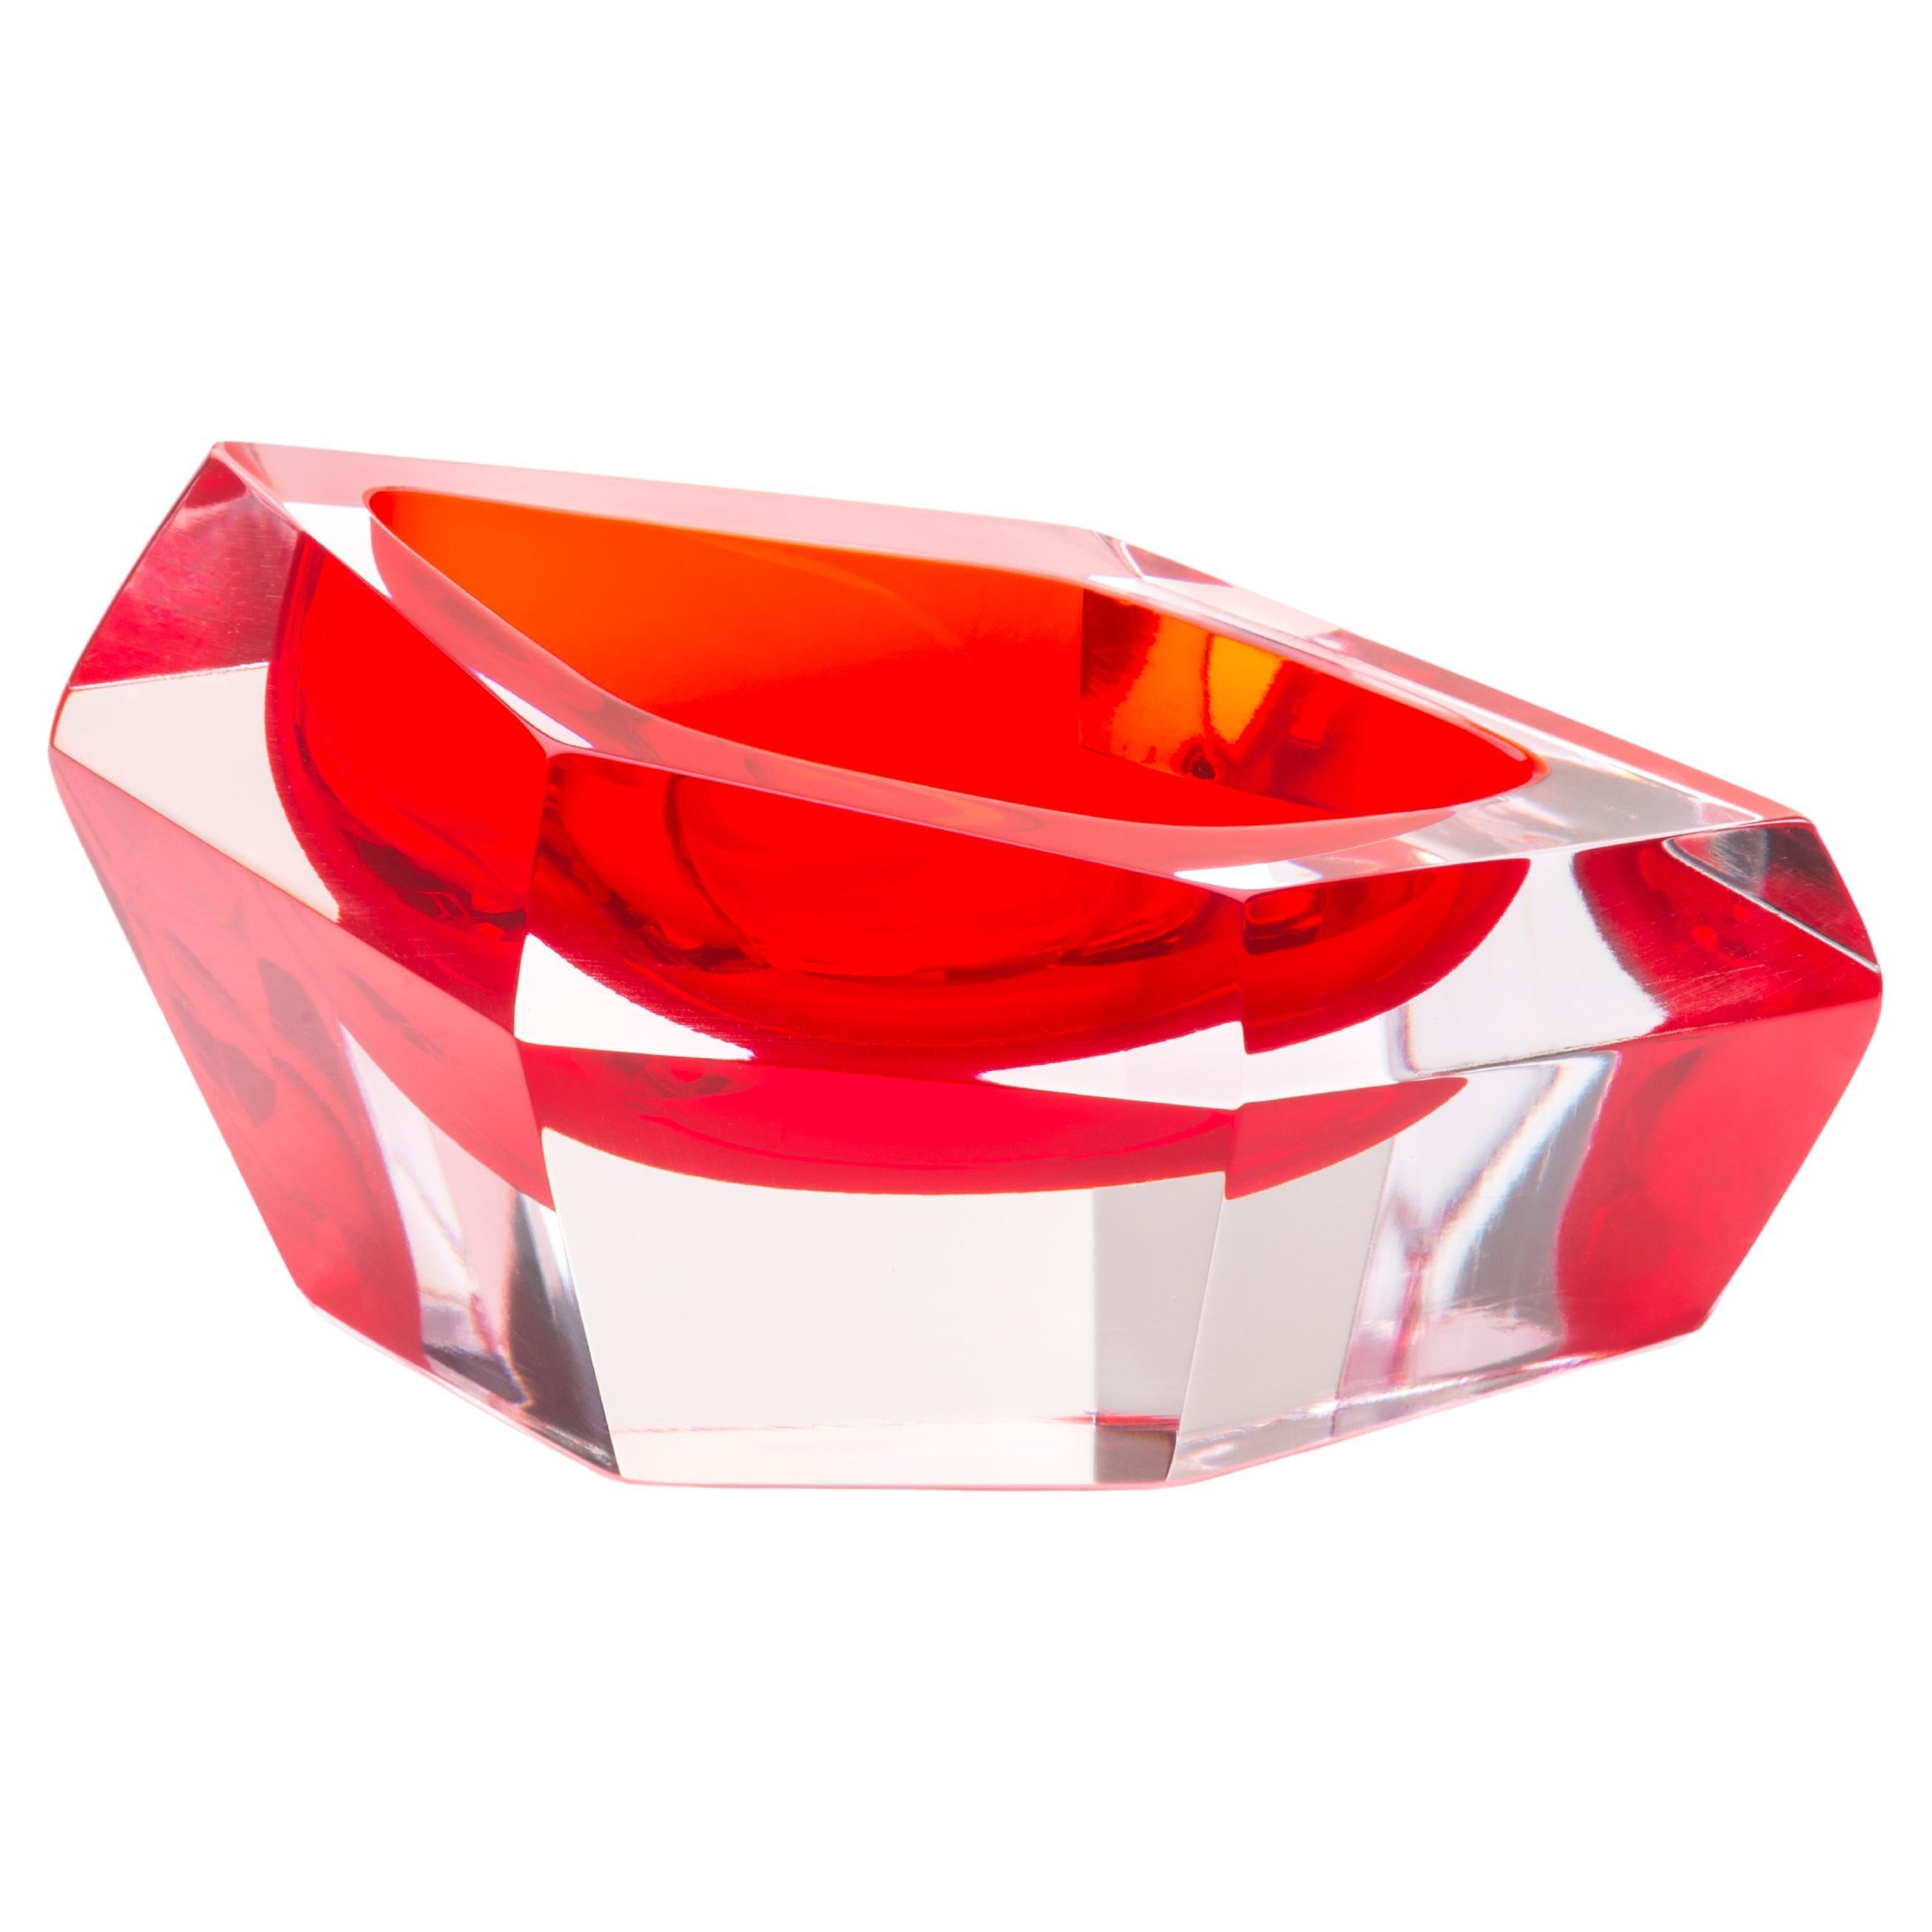 Kastle Red Mini Bowl by Purho For Sale